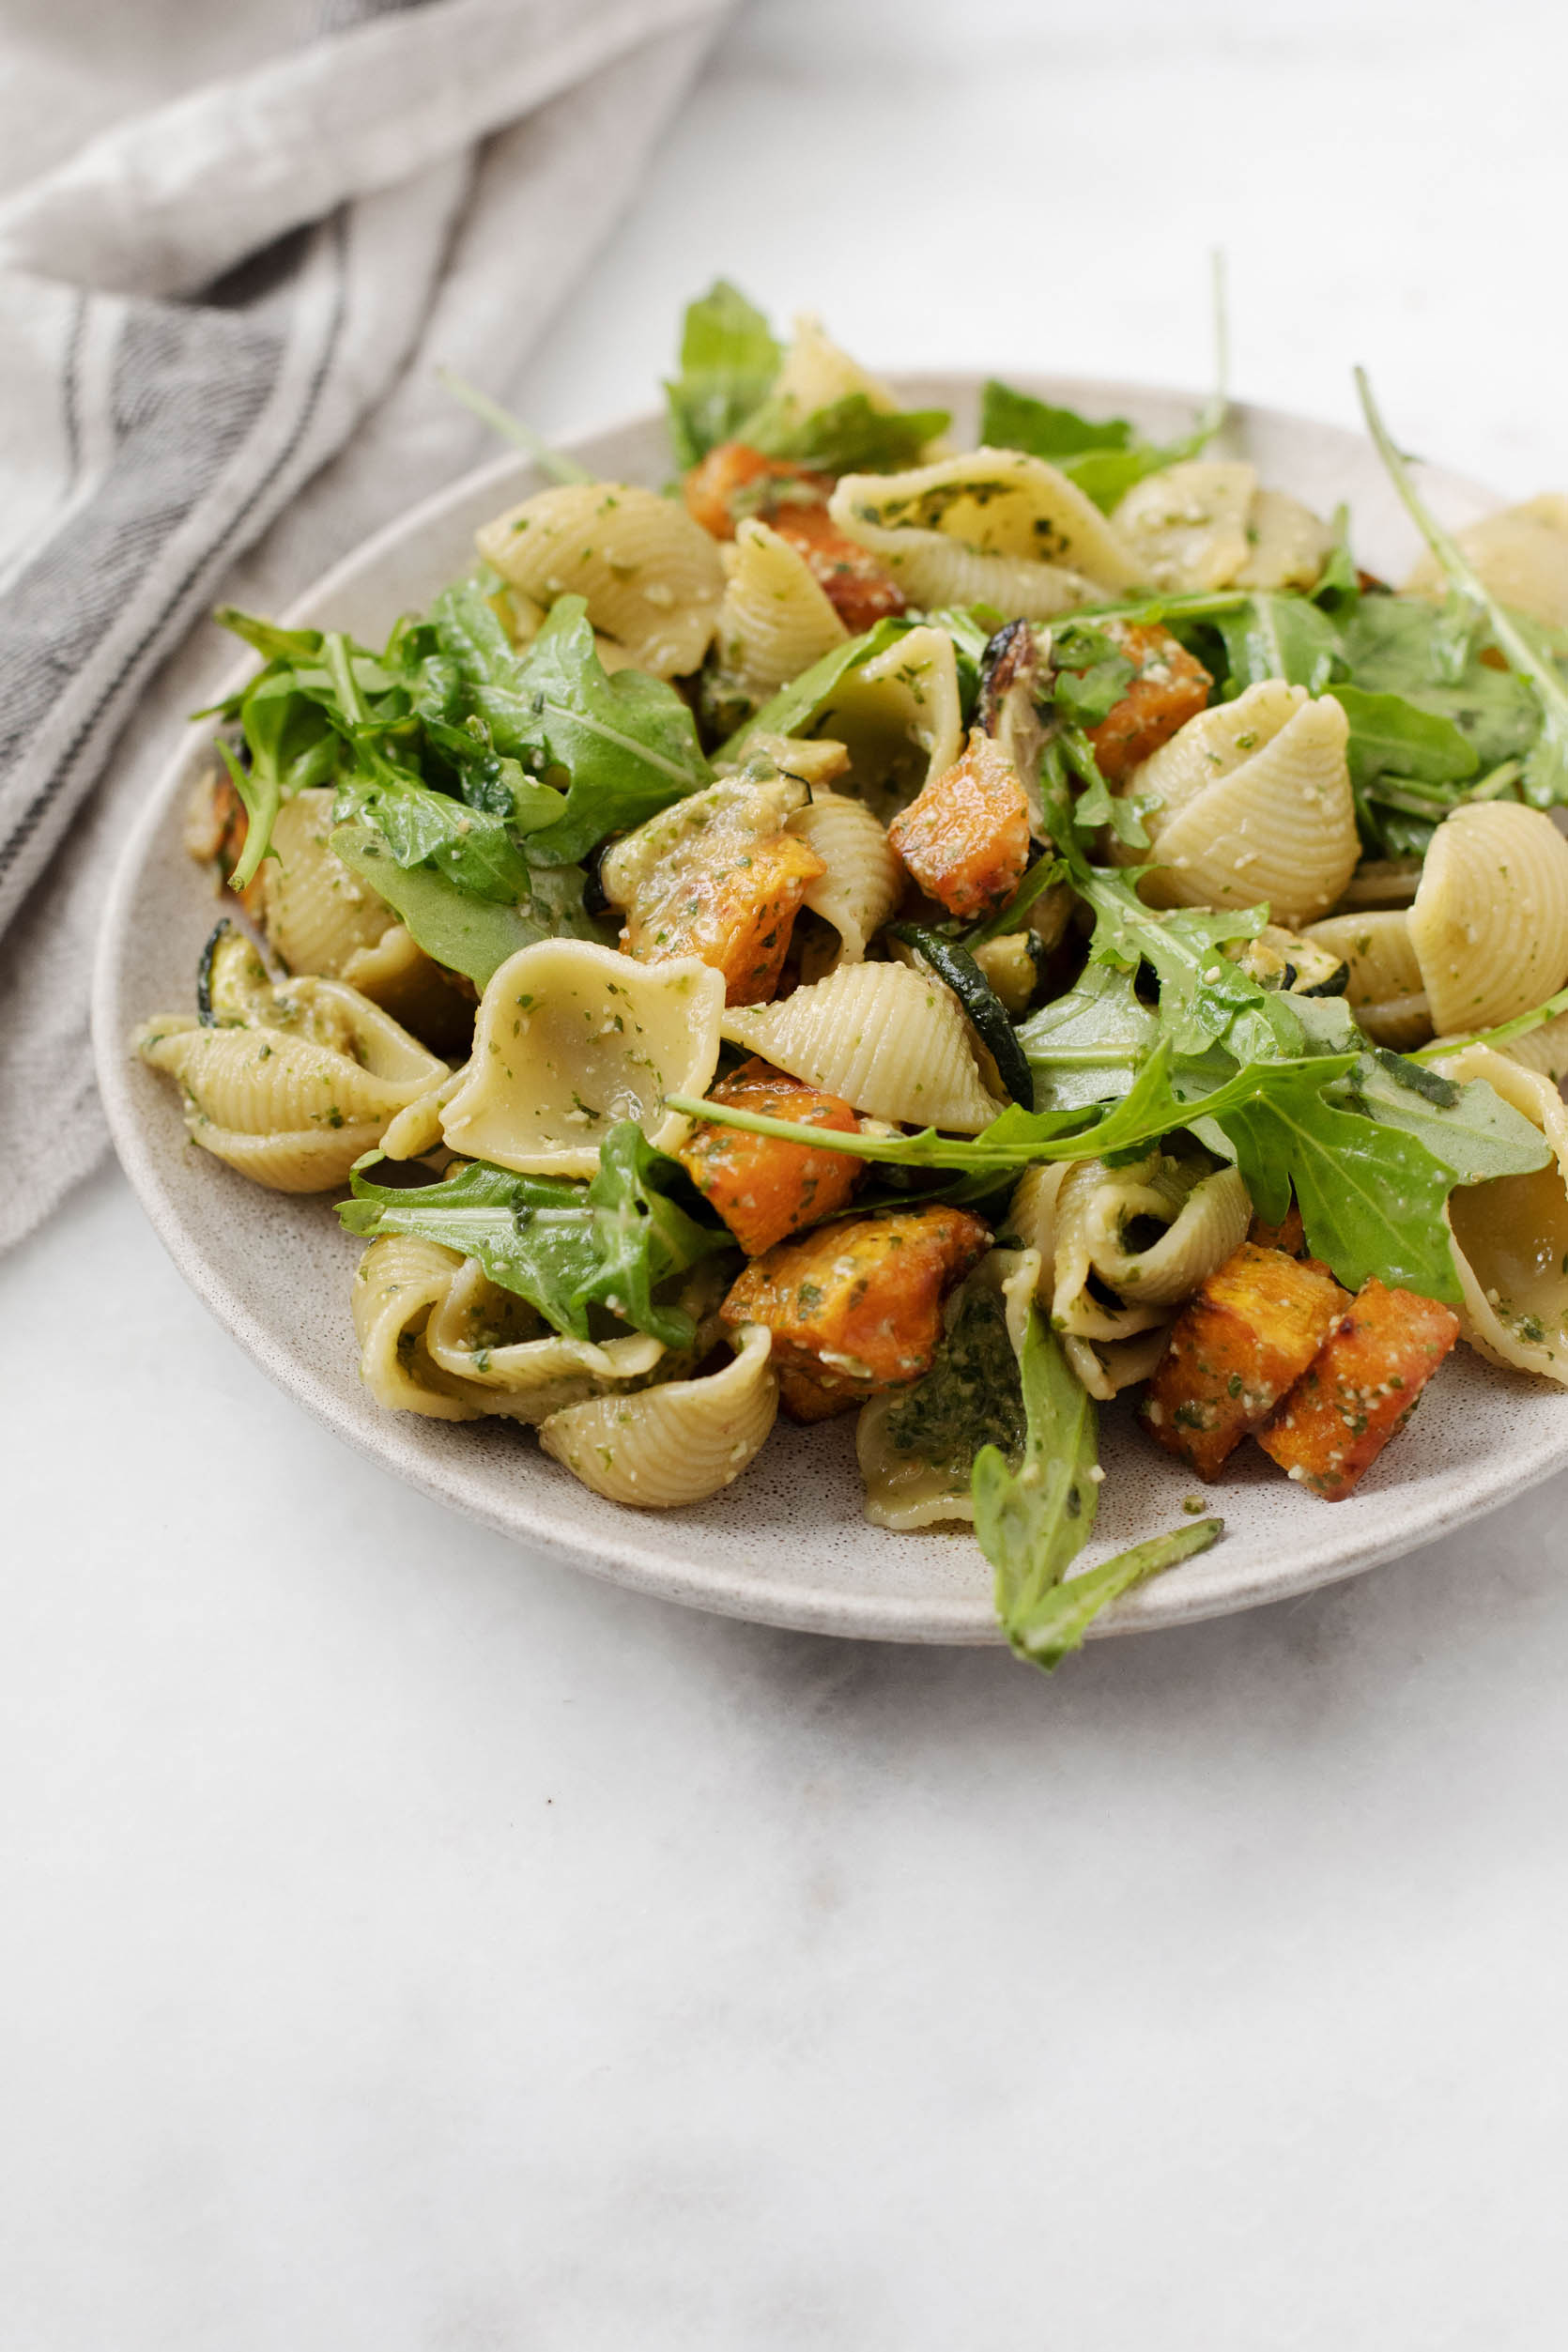 Roasted winter squash and zucchini are mixed with pasta and fresh arugula, along with pesto sauce, for a colorful plate of food.